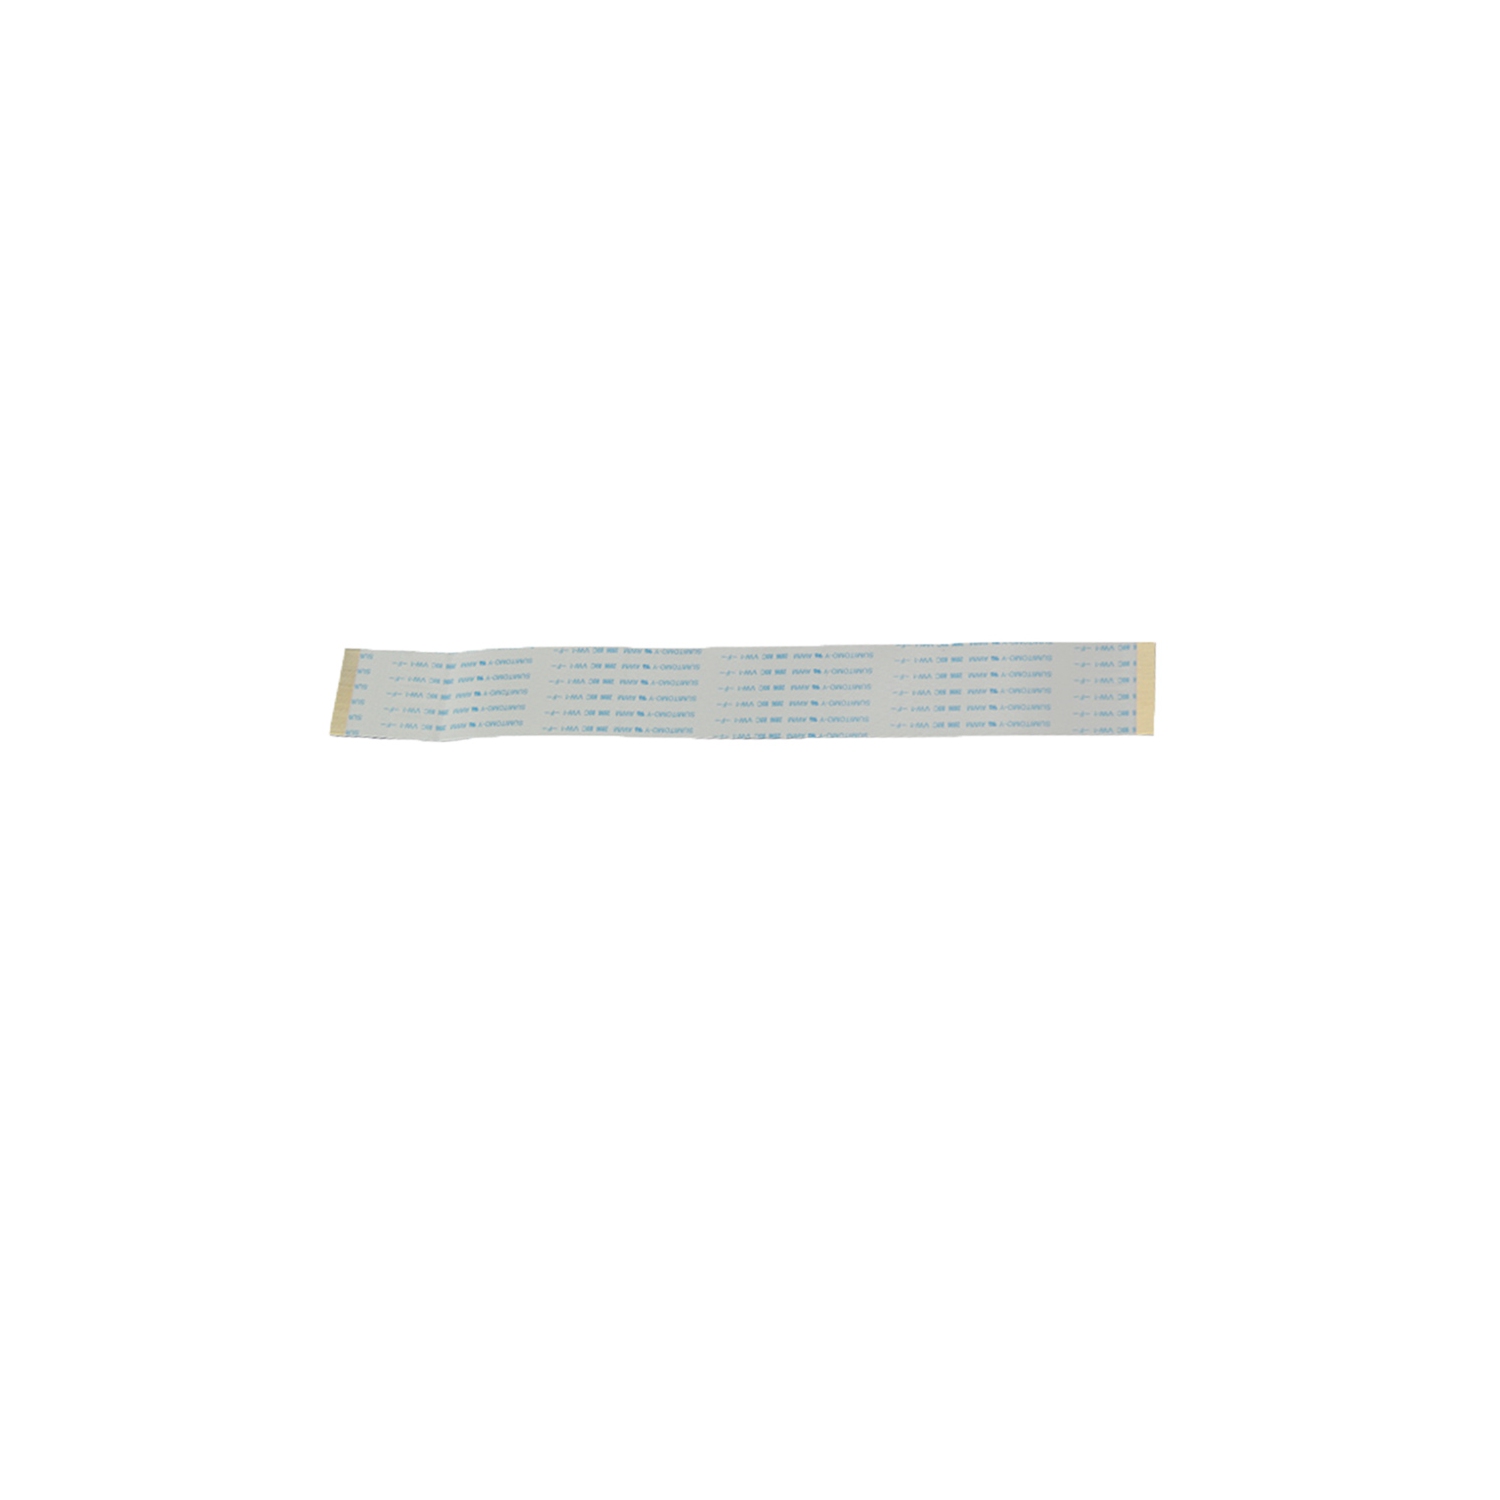 Replacement KEM-460A Laser Lens Flex Cable For Sony PS3 Slim